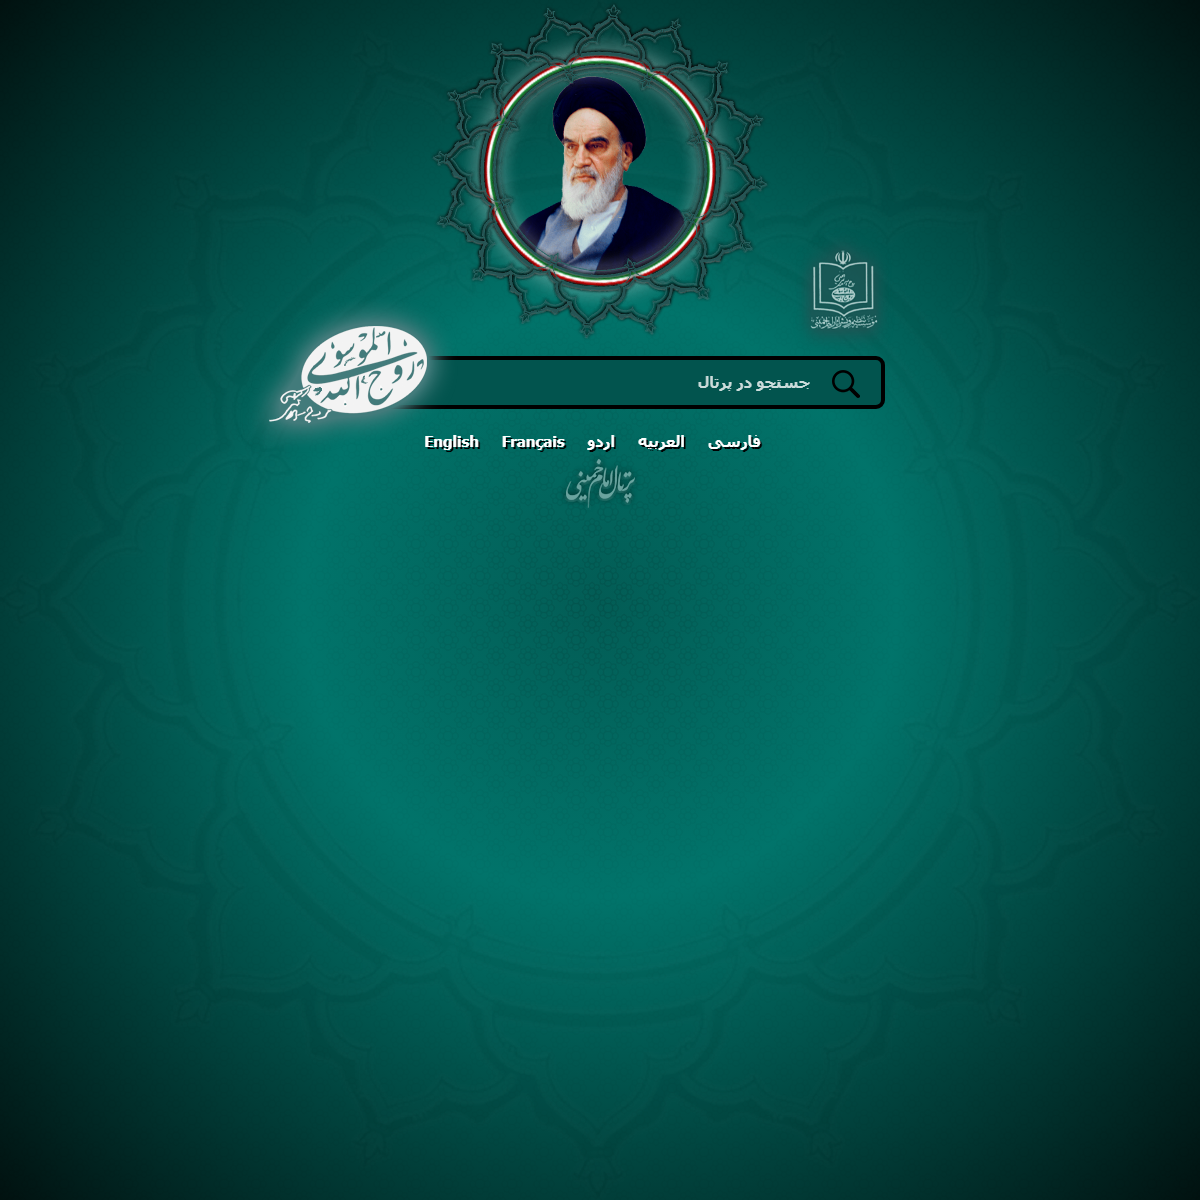 A complete backup of http://www.imam-khomeini.ir/